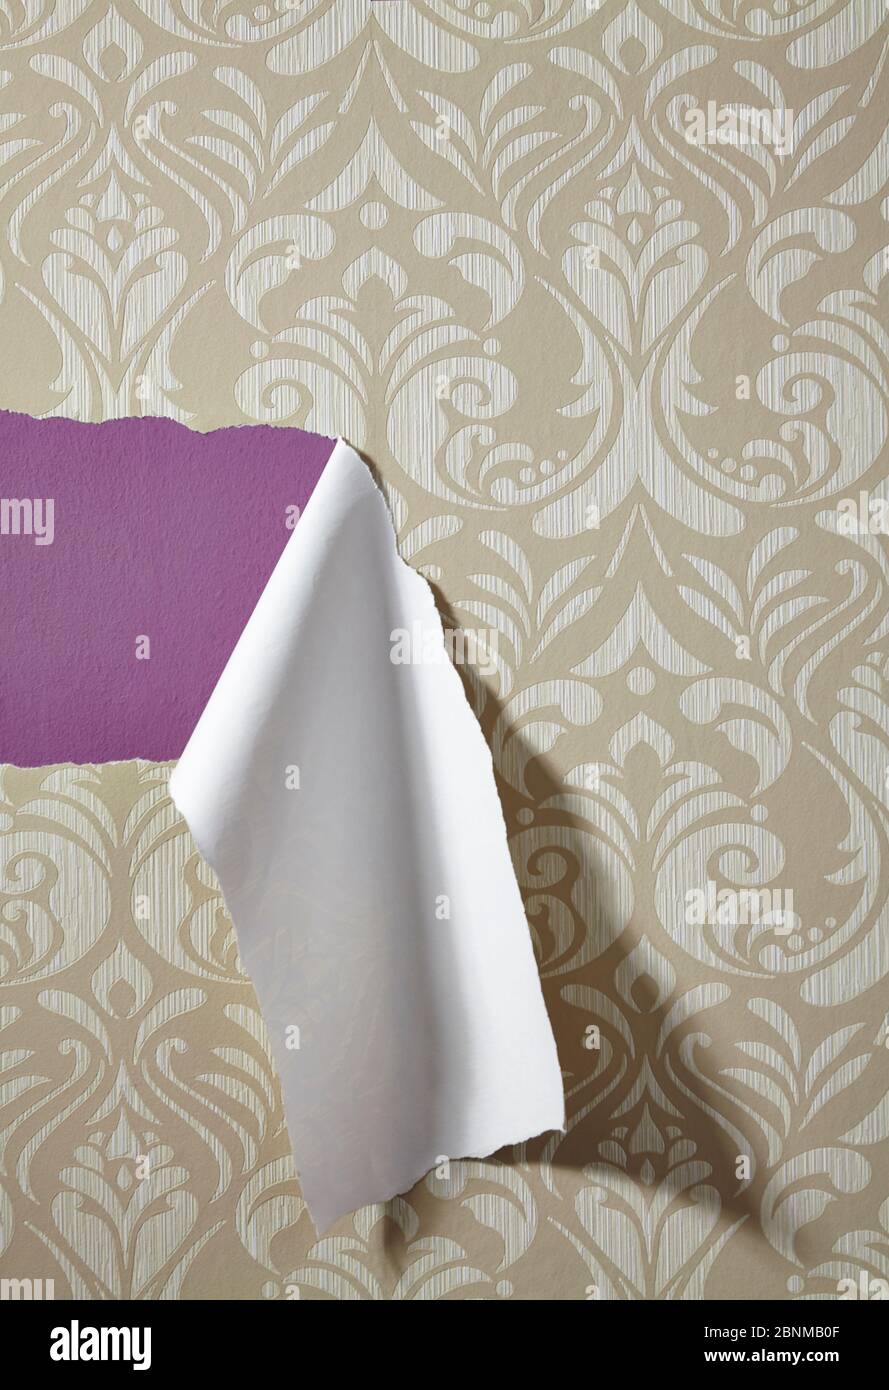 In some areas, wallpaper with a floral pattern is torn off a purple wall Stock Photo